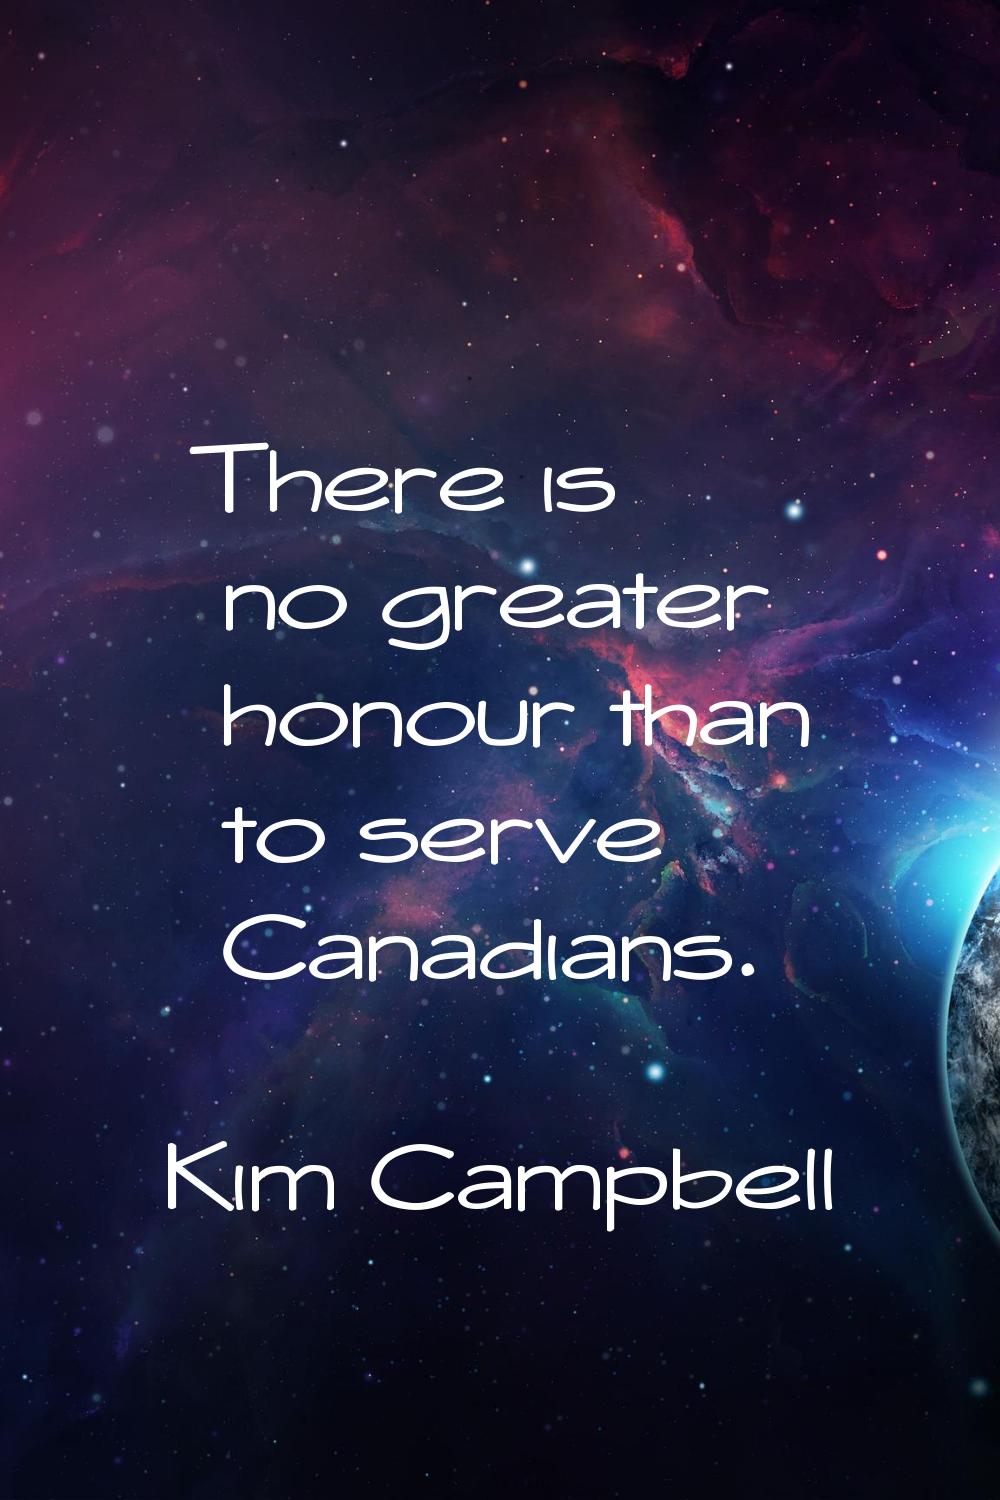 There is no greater honour than to serve Canadians.